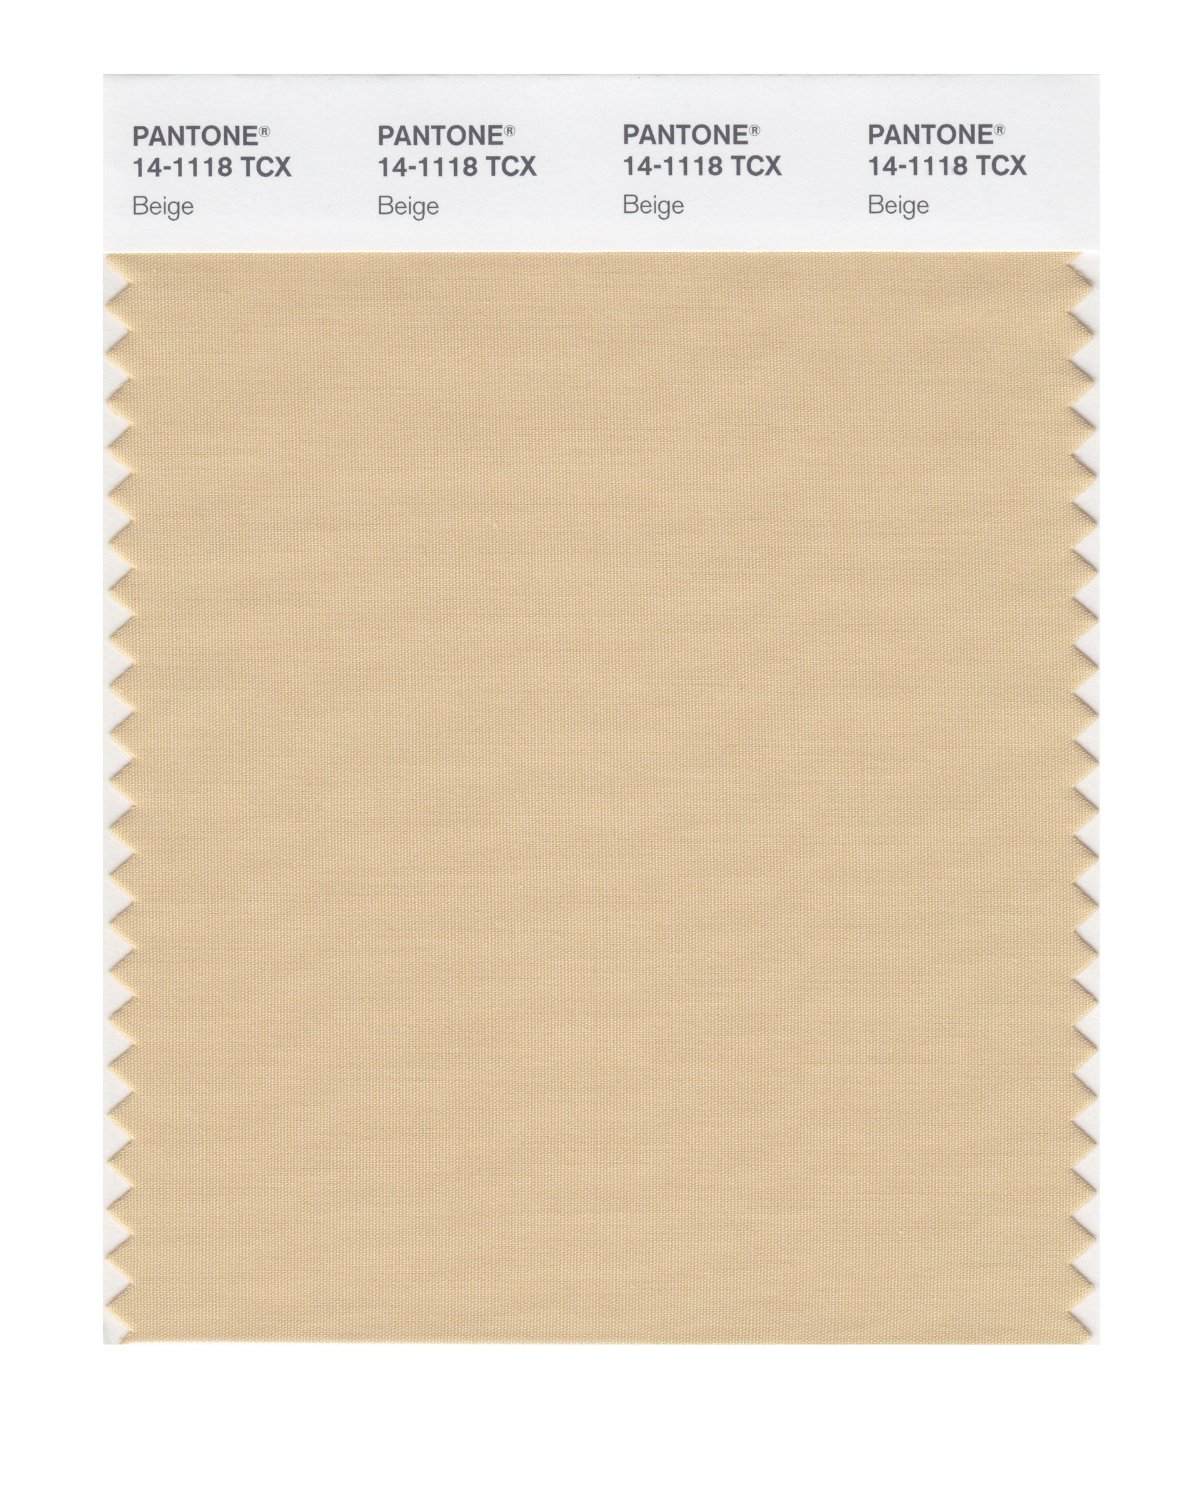 Bother Energize Pegs pantone solid coated beige Apply Stop by to know ...